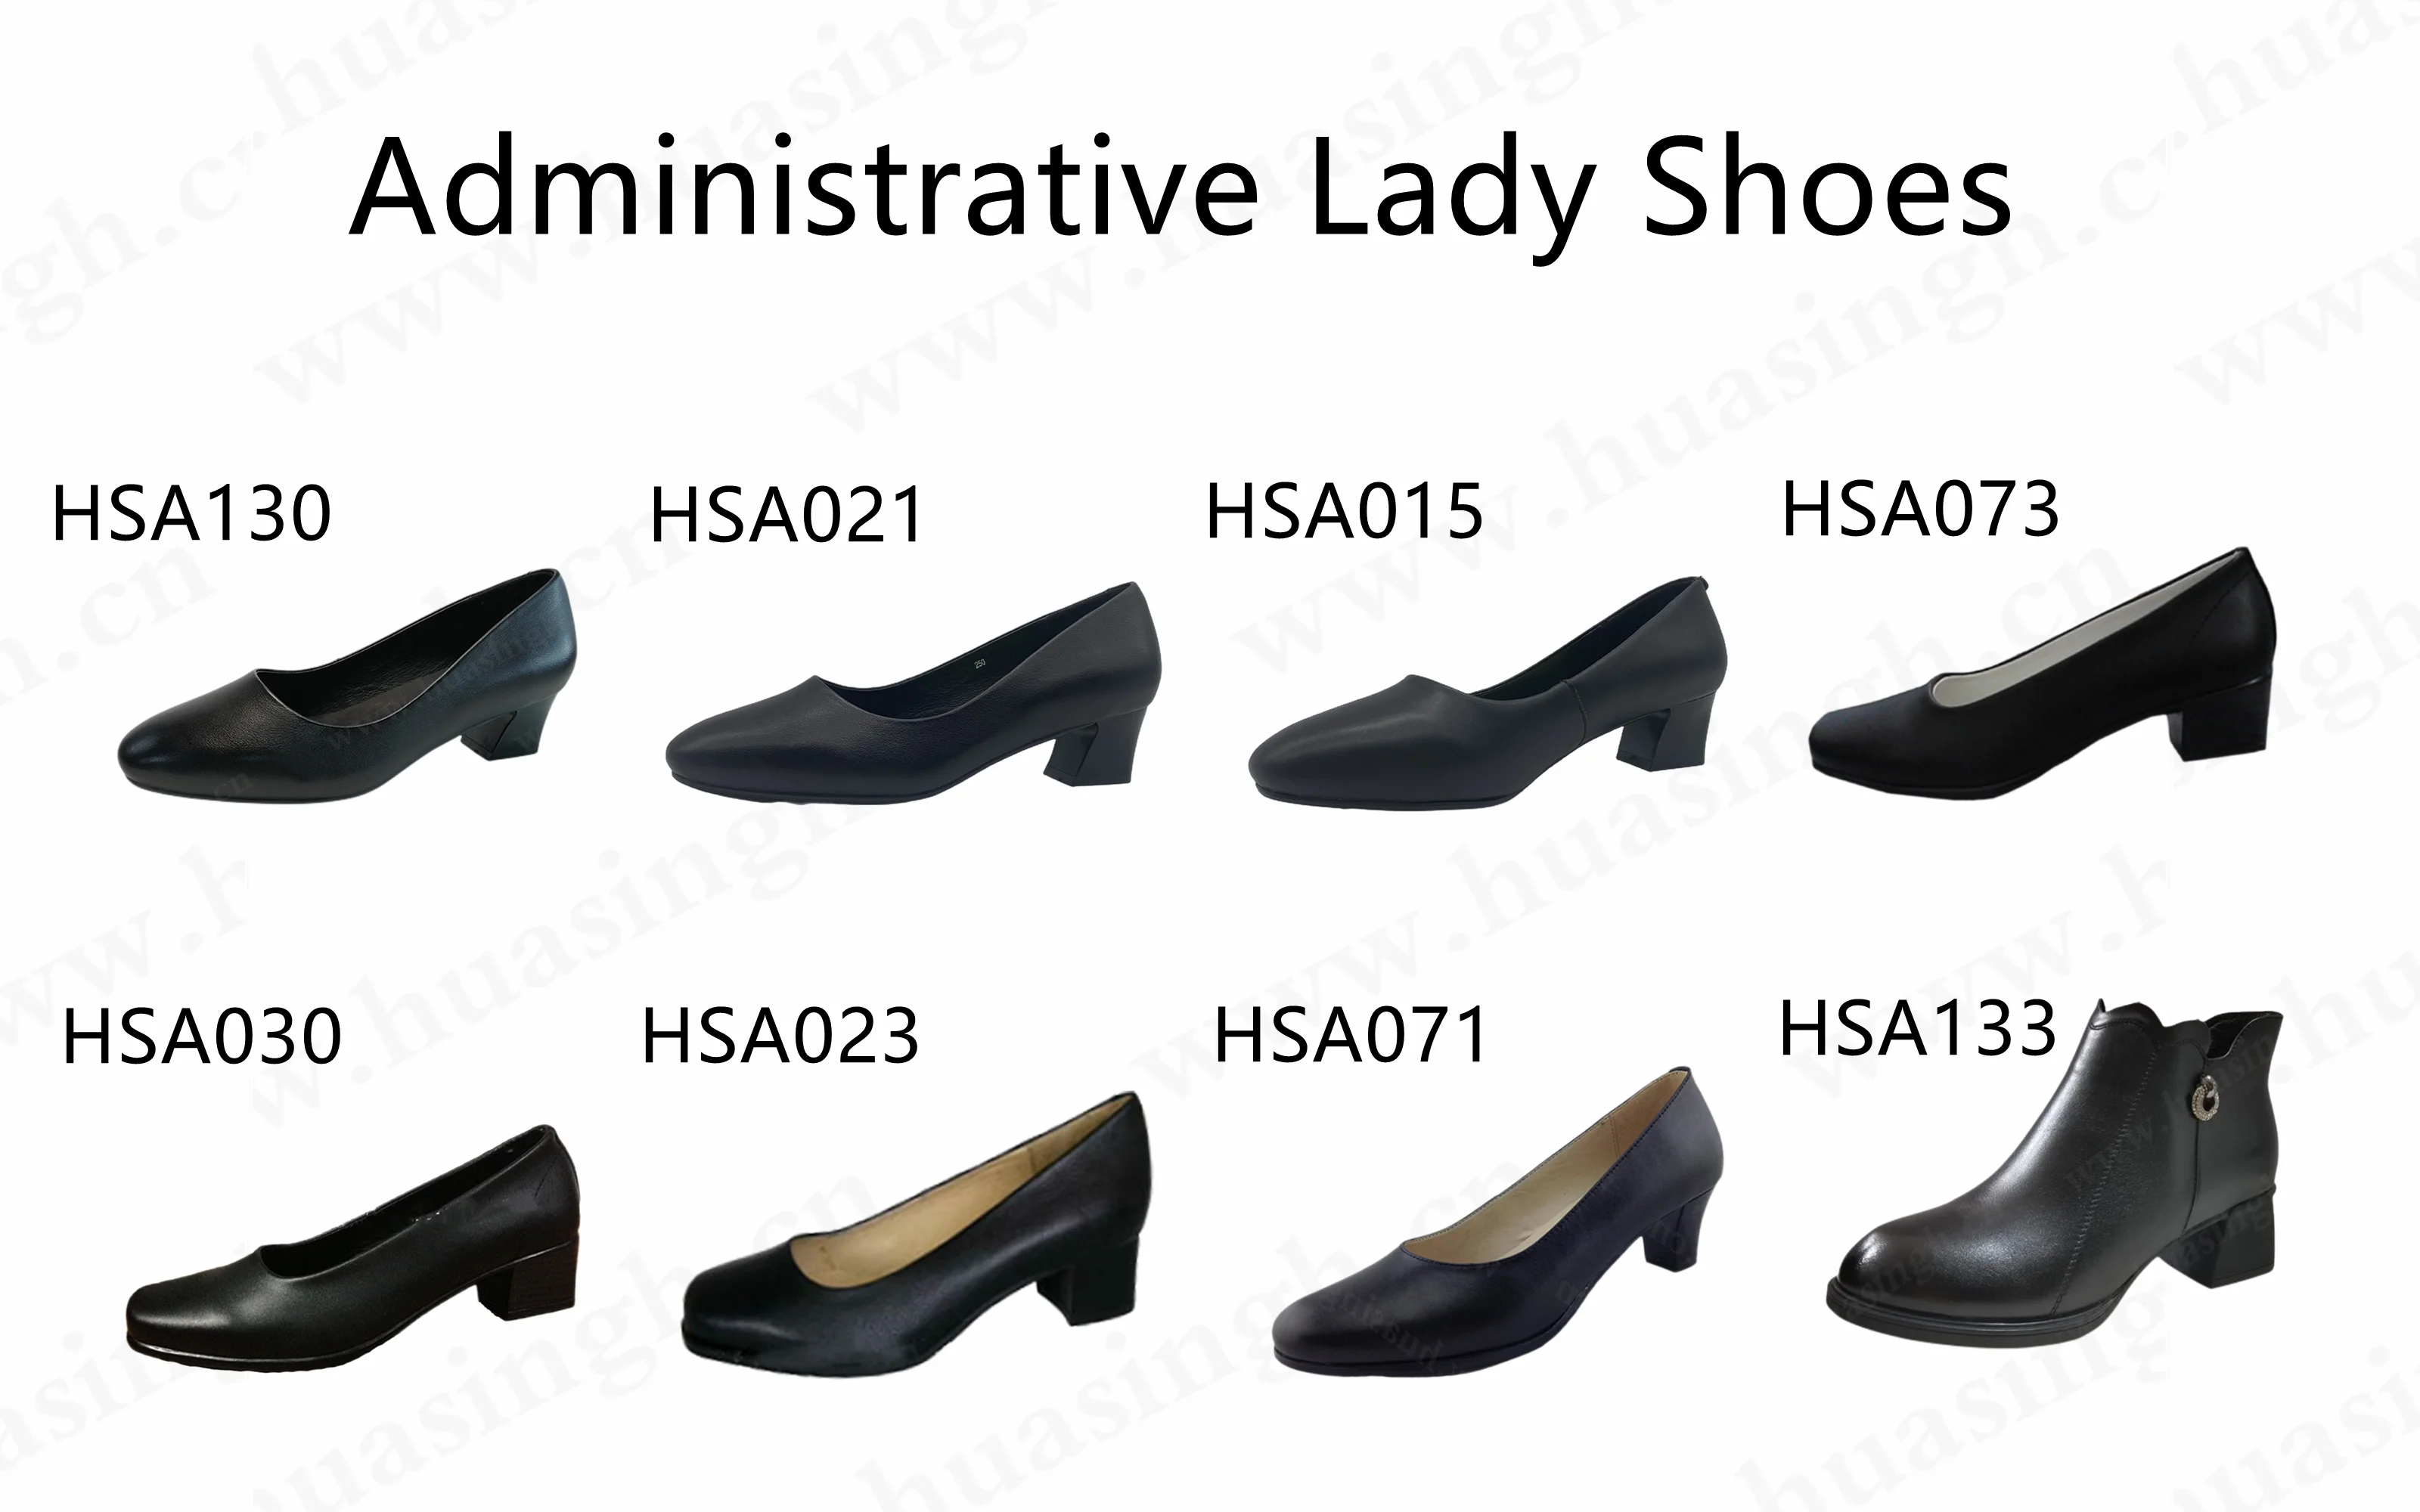 Lxg,Formal Meeting Elegant Style Lady Administrative Shoes Full Grain ...